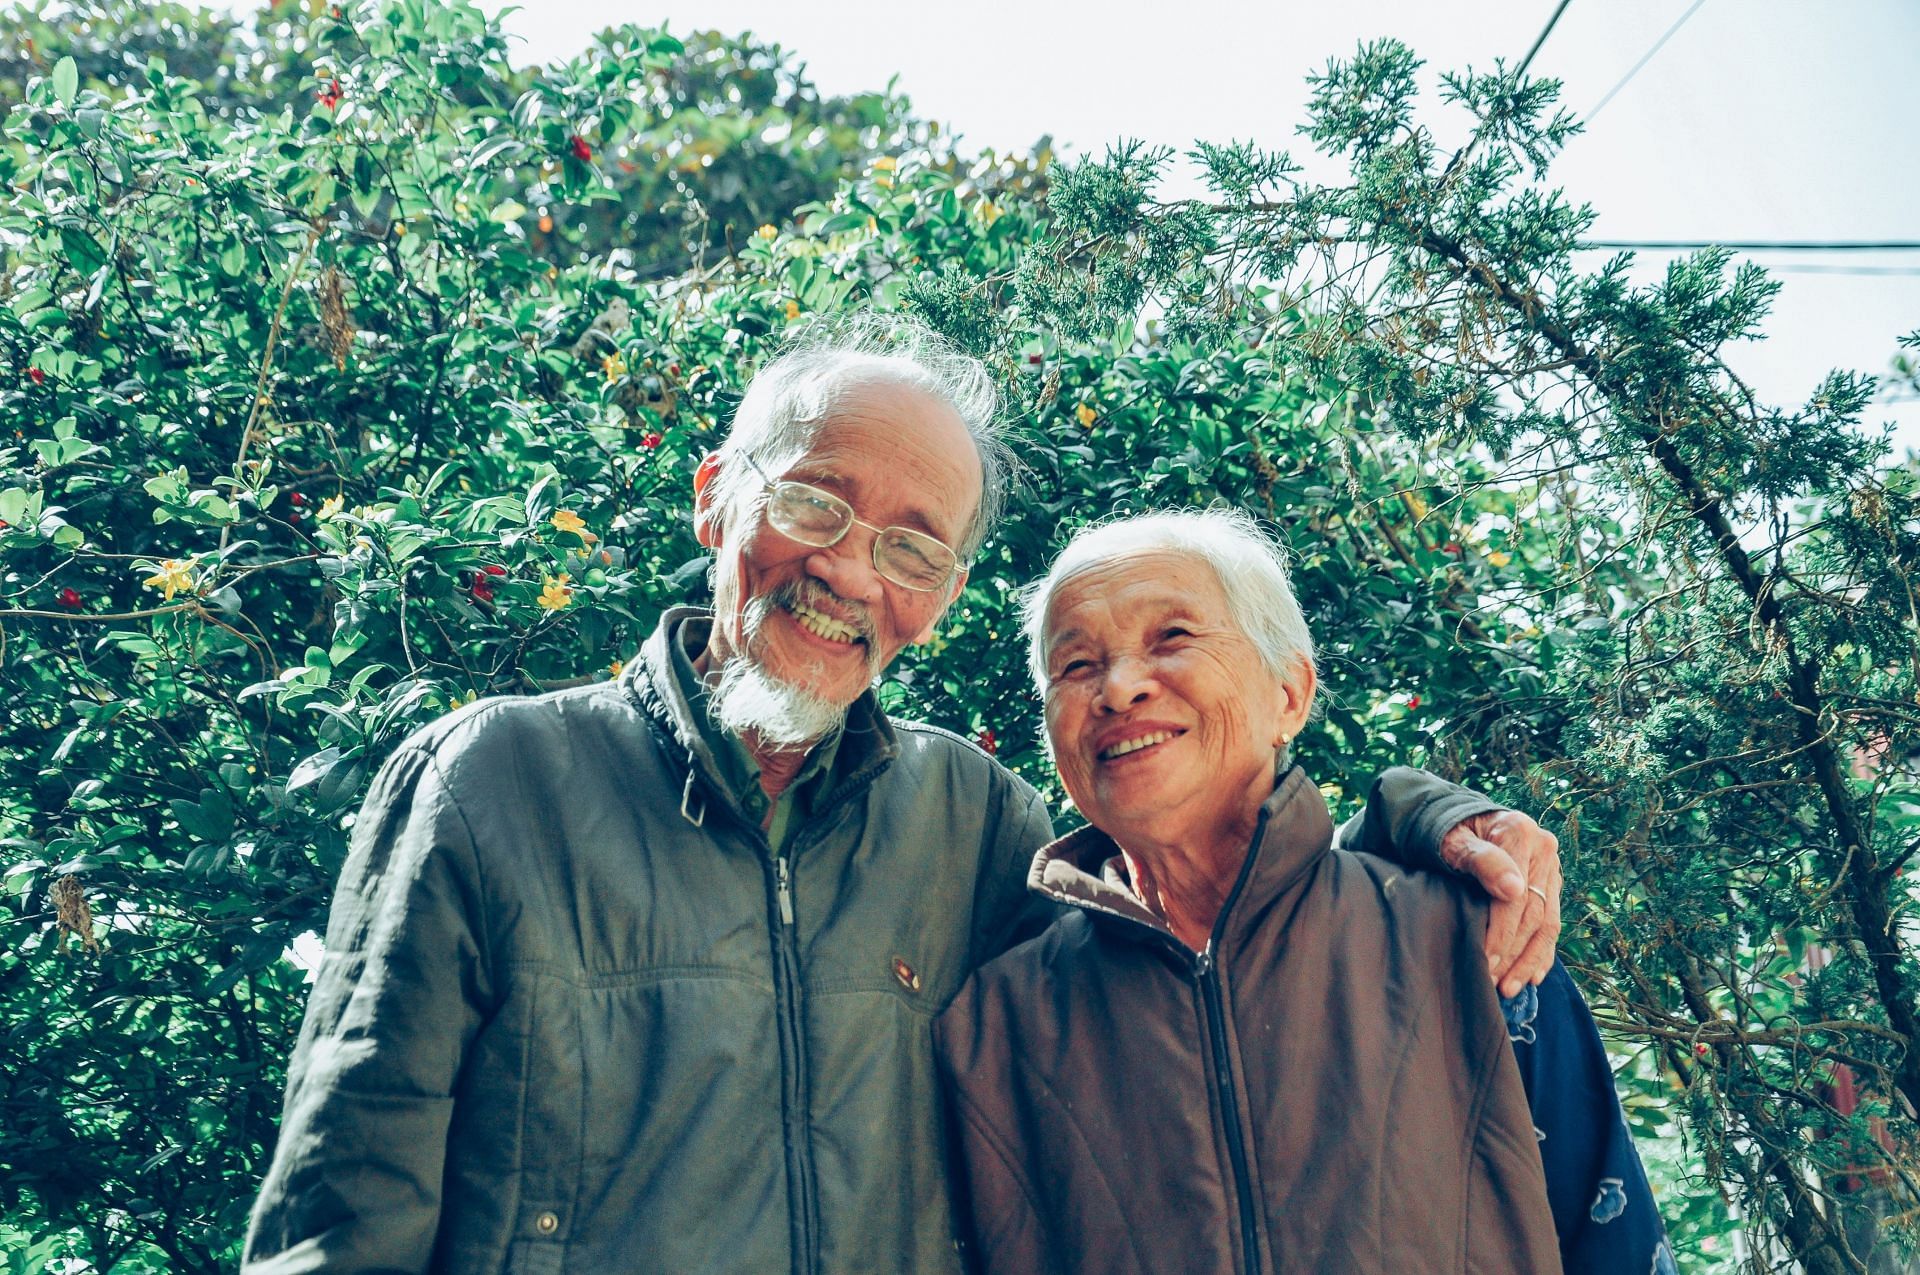 Some people live till 100 and do so by leading a healthy lifestyle. (Image via Pexels/Tristan Le)